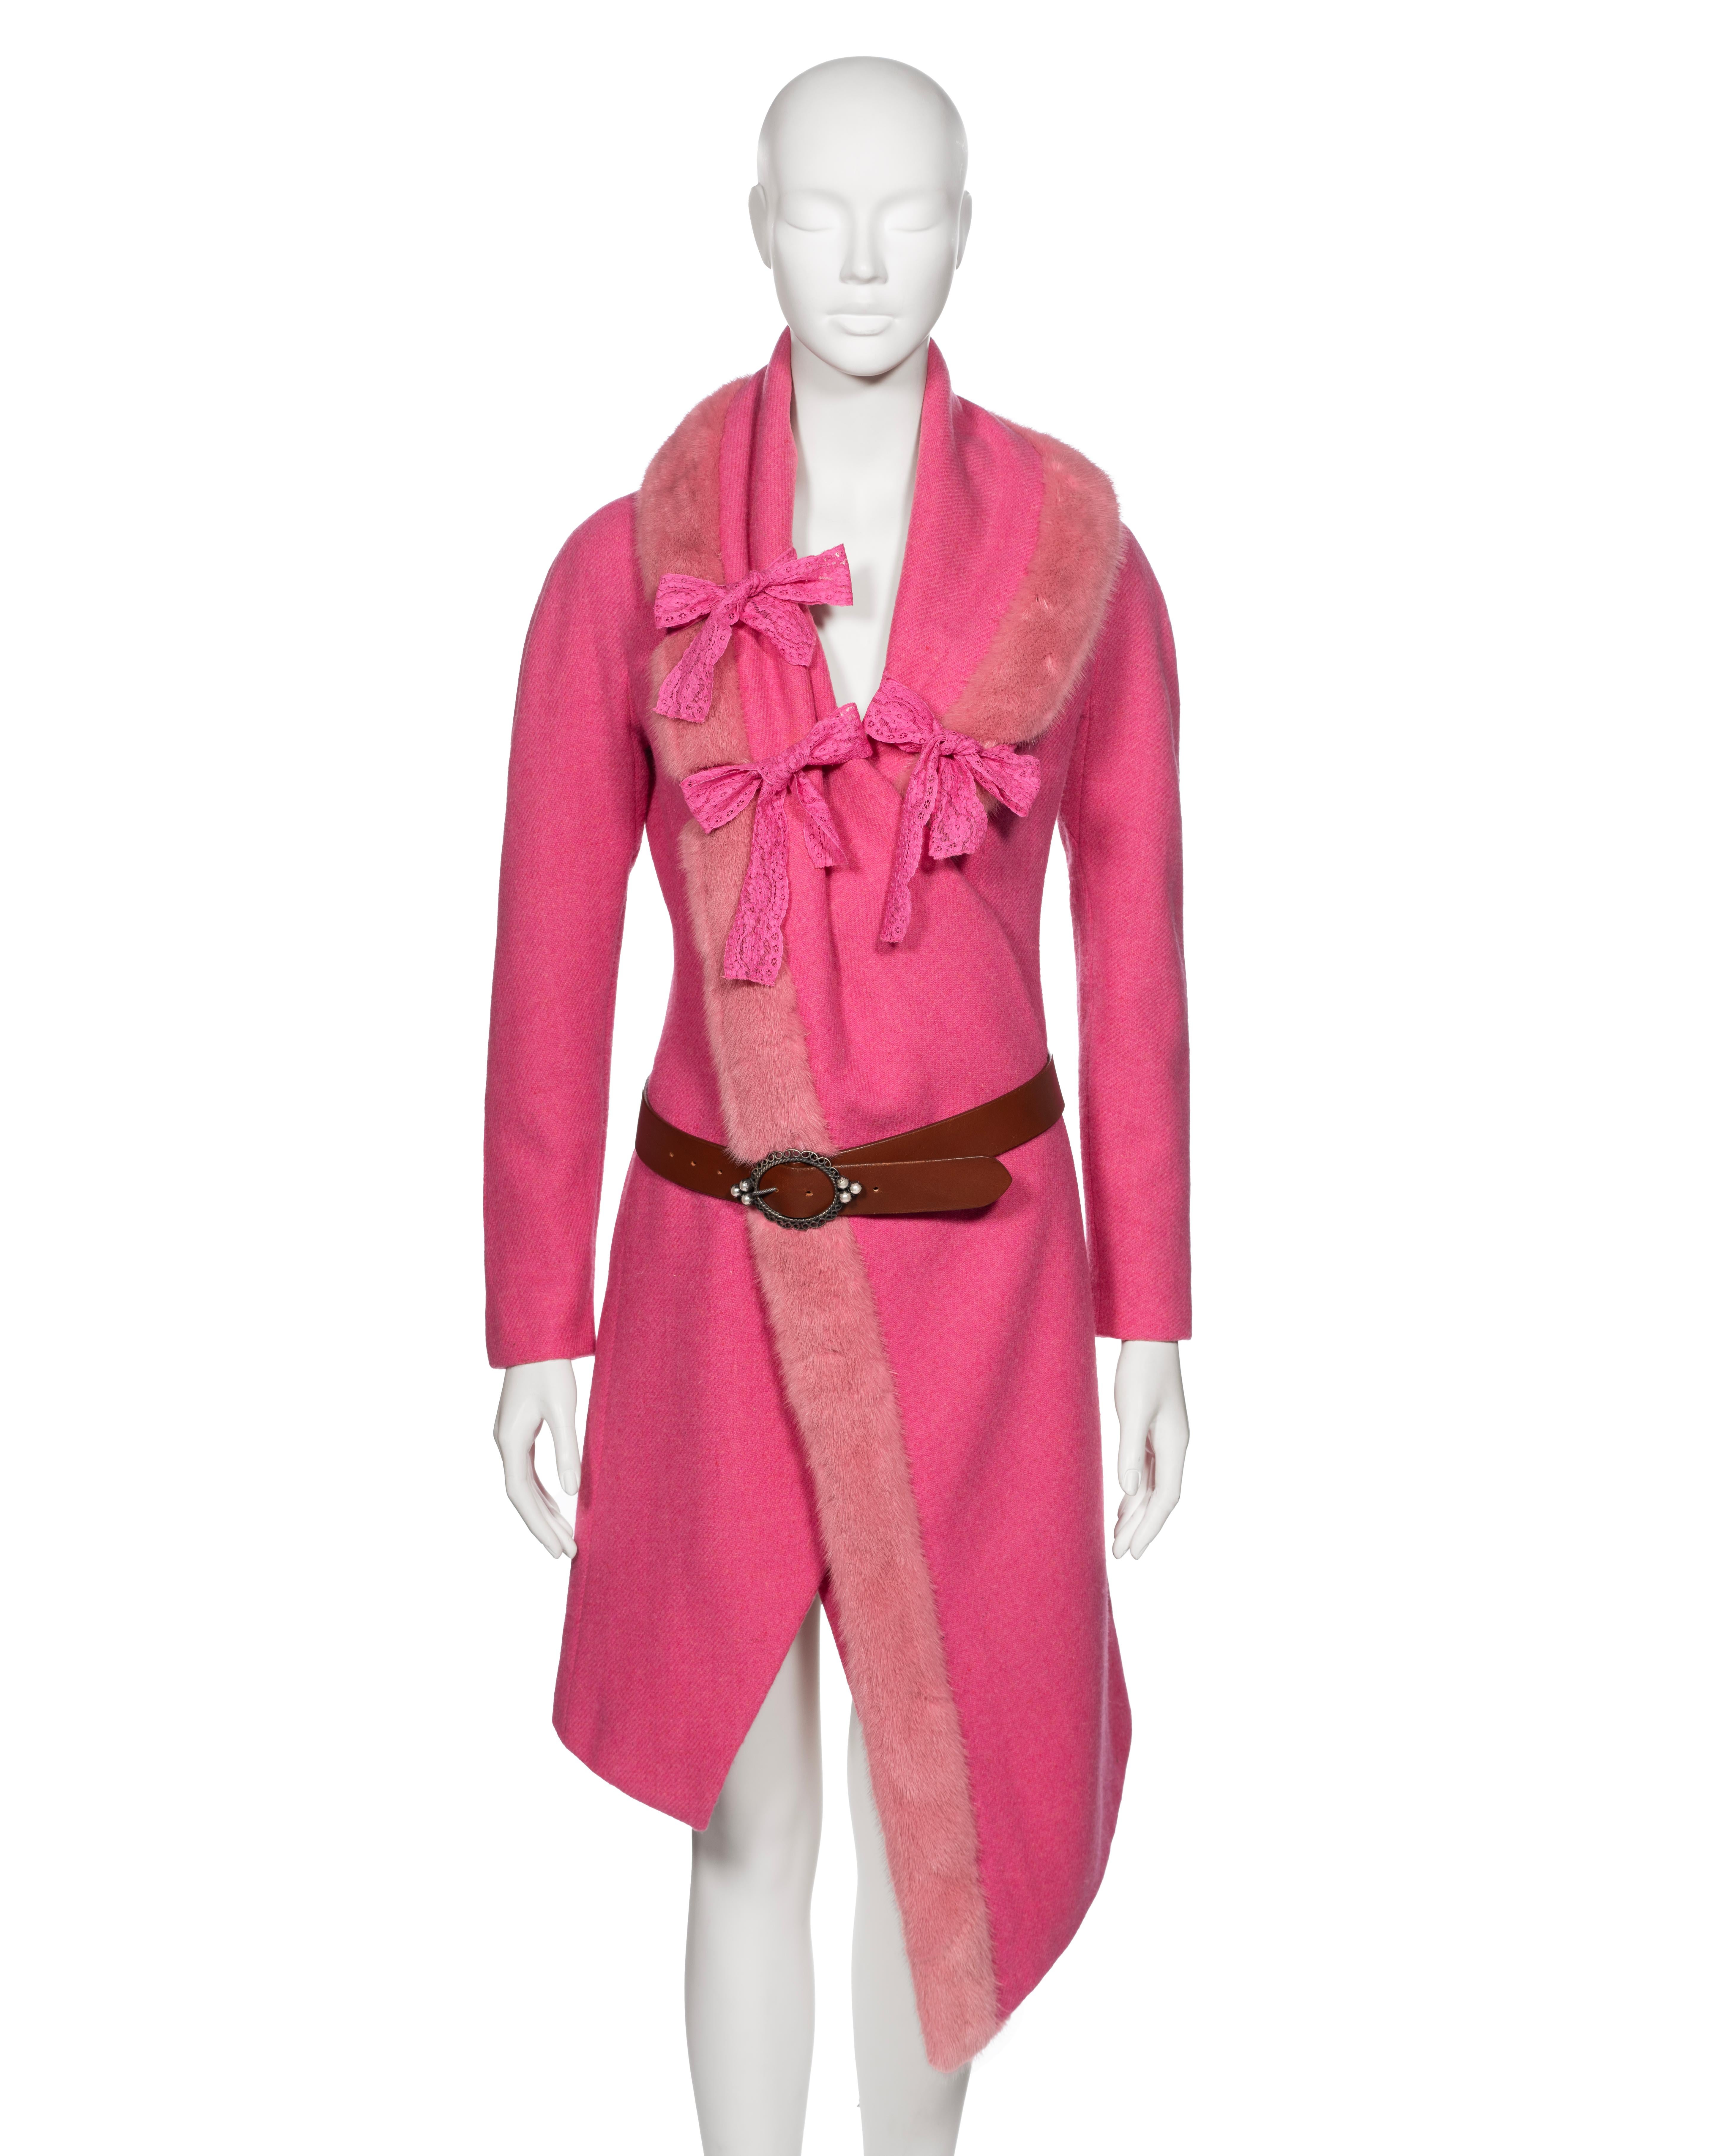 ▪ Archival Christian Dior Runway Coat
▪ Creative Director: John Galliano
▪ Fall-Winter 1998
▪ Sold by One of a Kind Archive
▪ Crafted from exquisite pink wool tweed
▪ Boasts an asymmetric large shawl lapel cascading to the hemline, trimmed with